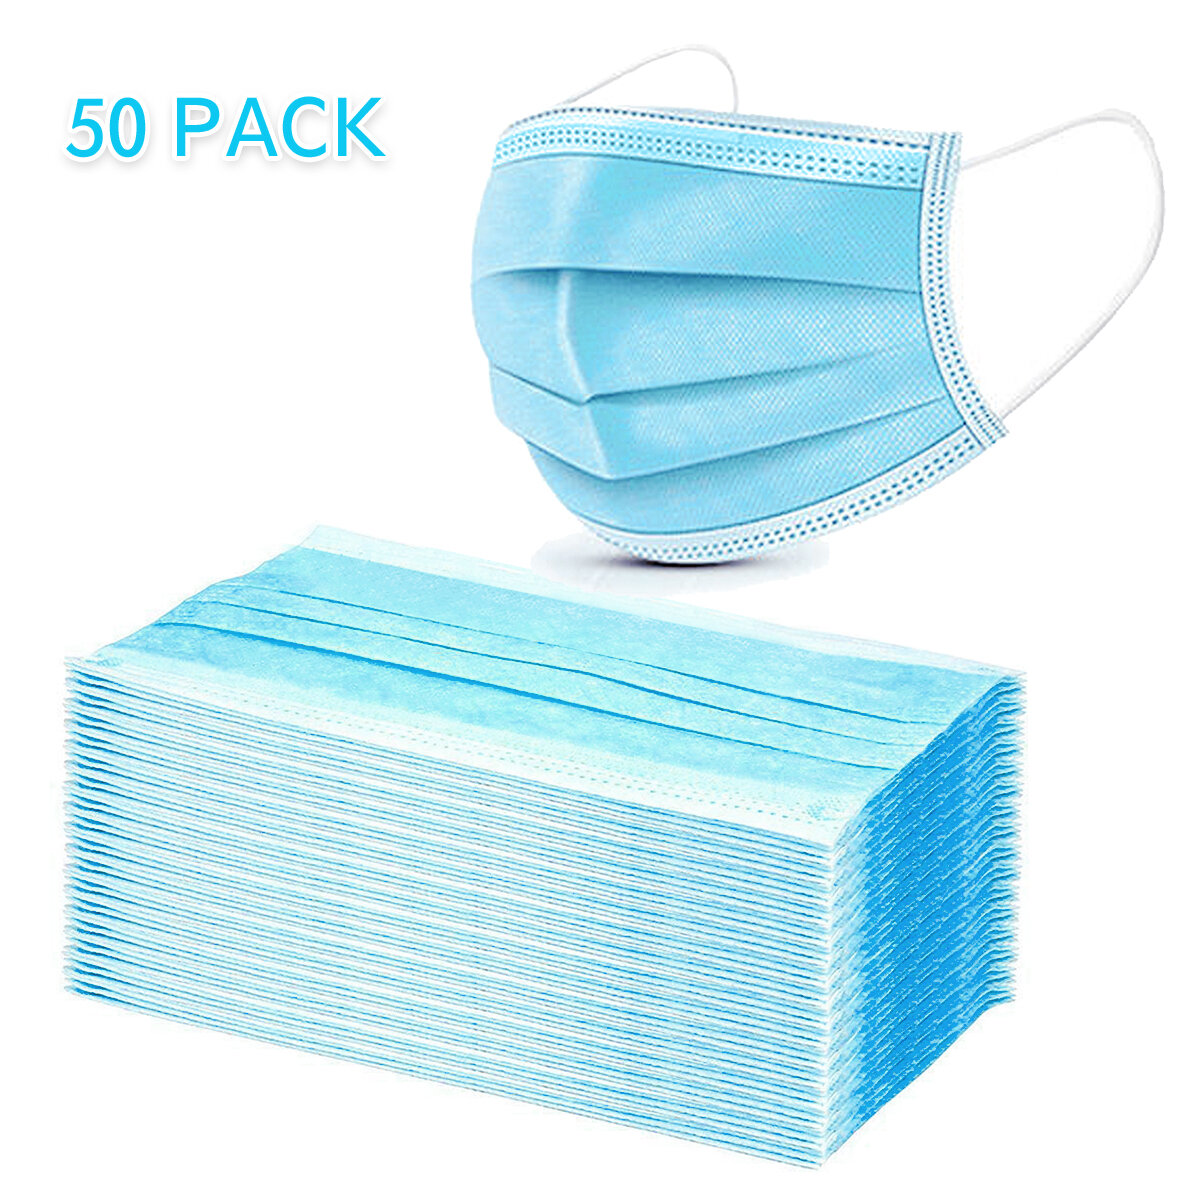 50Pcs Disposable Mouth Face Masks Face 3-layer Respirator Mask Dust-Proof Personal Protection